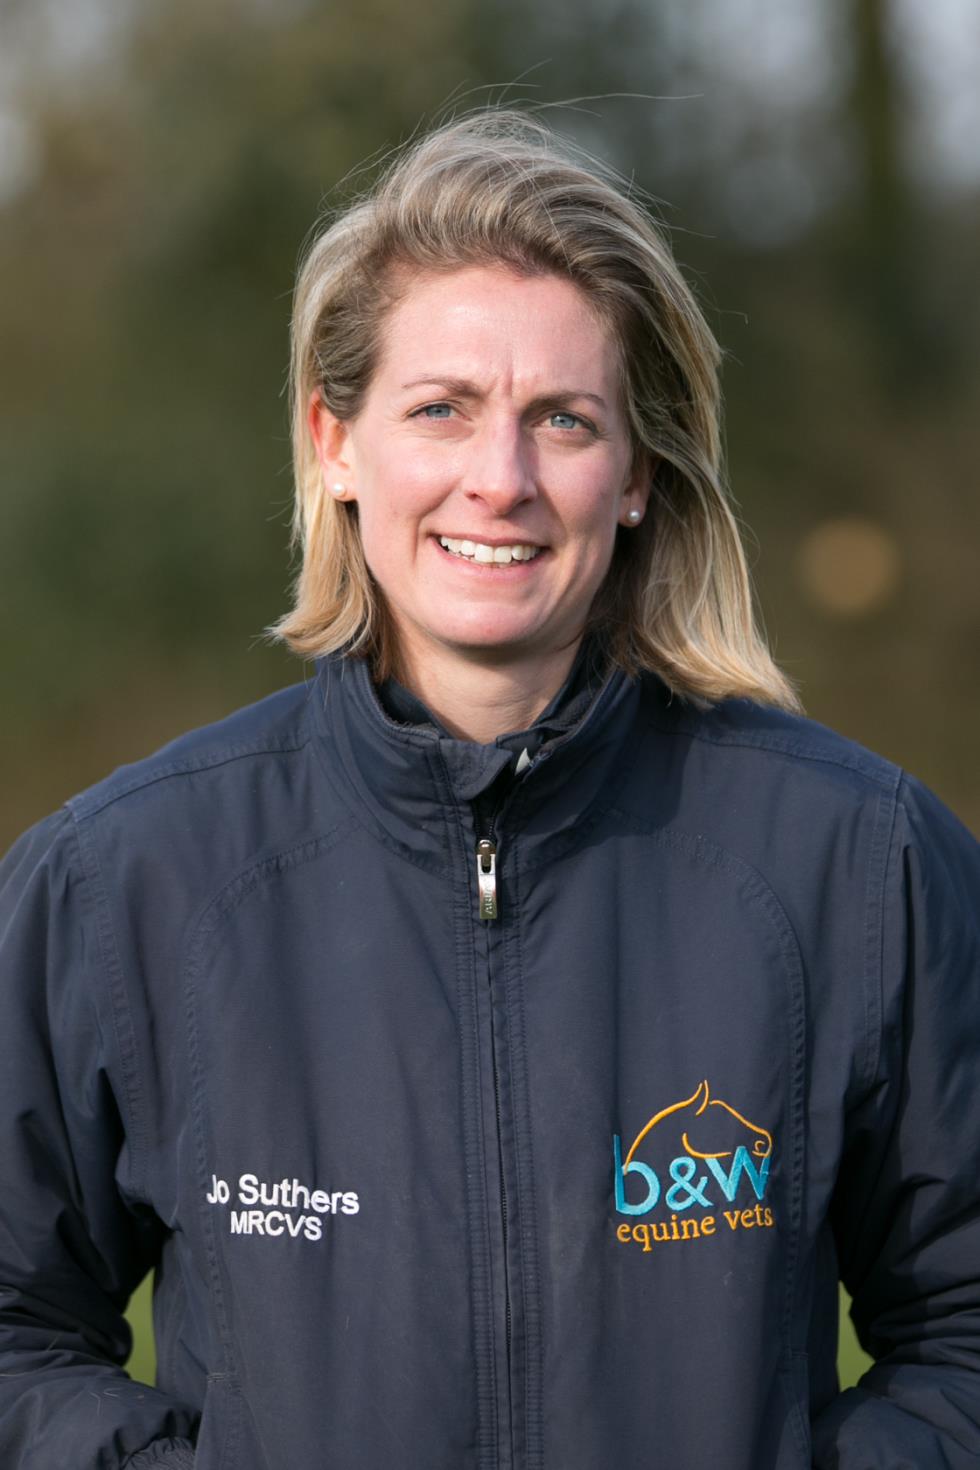 Dr Jo Suthers